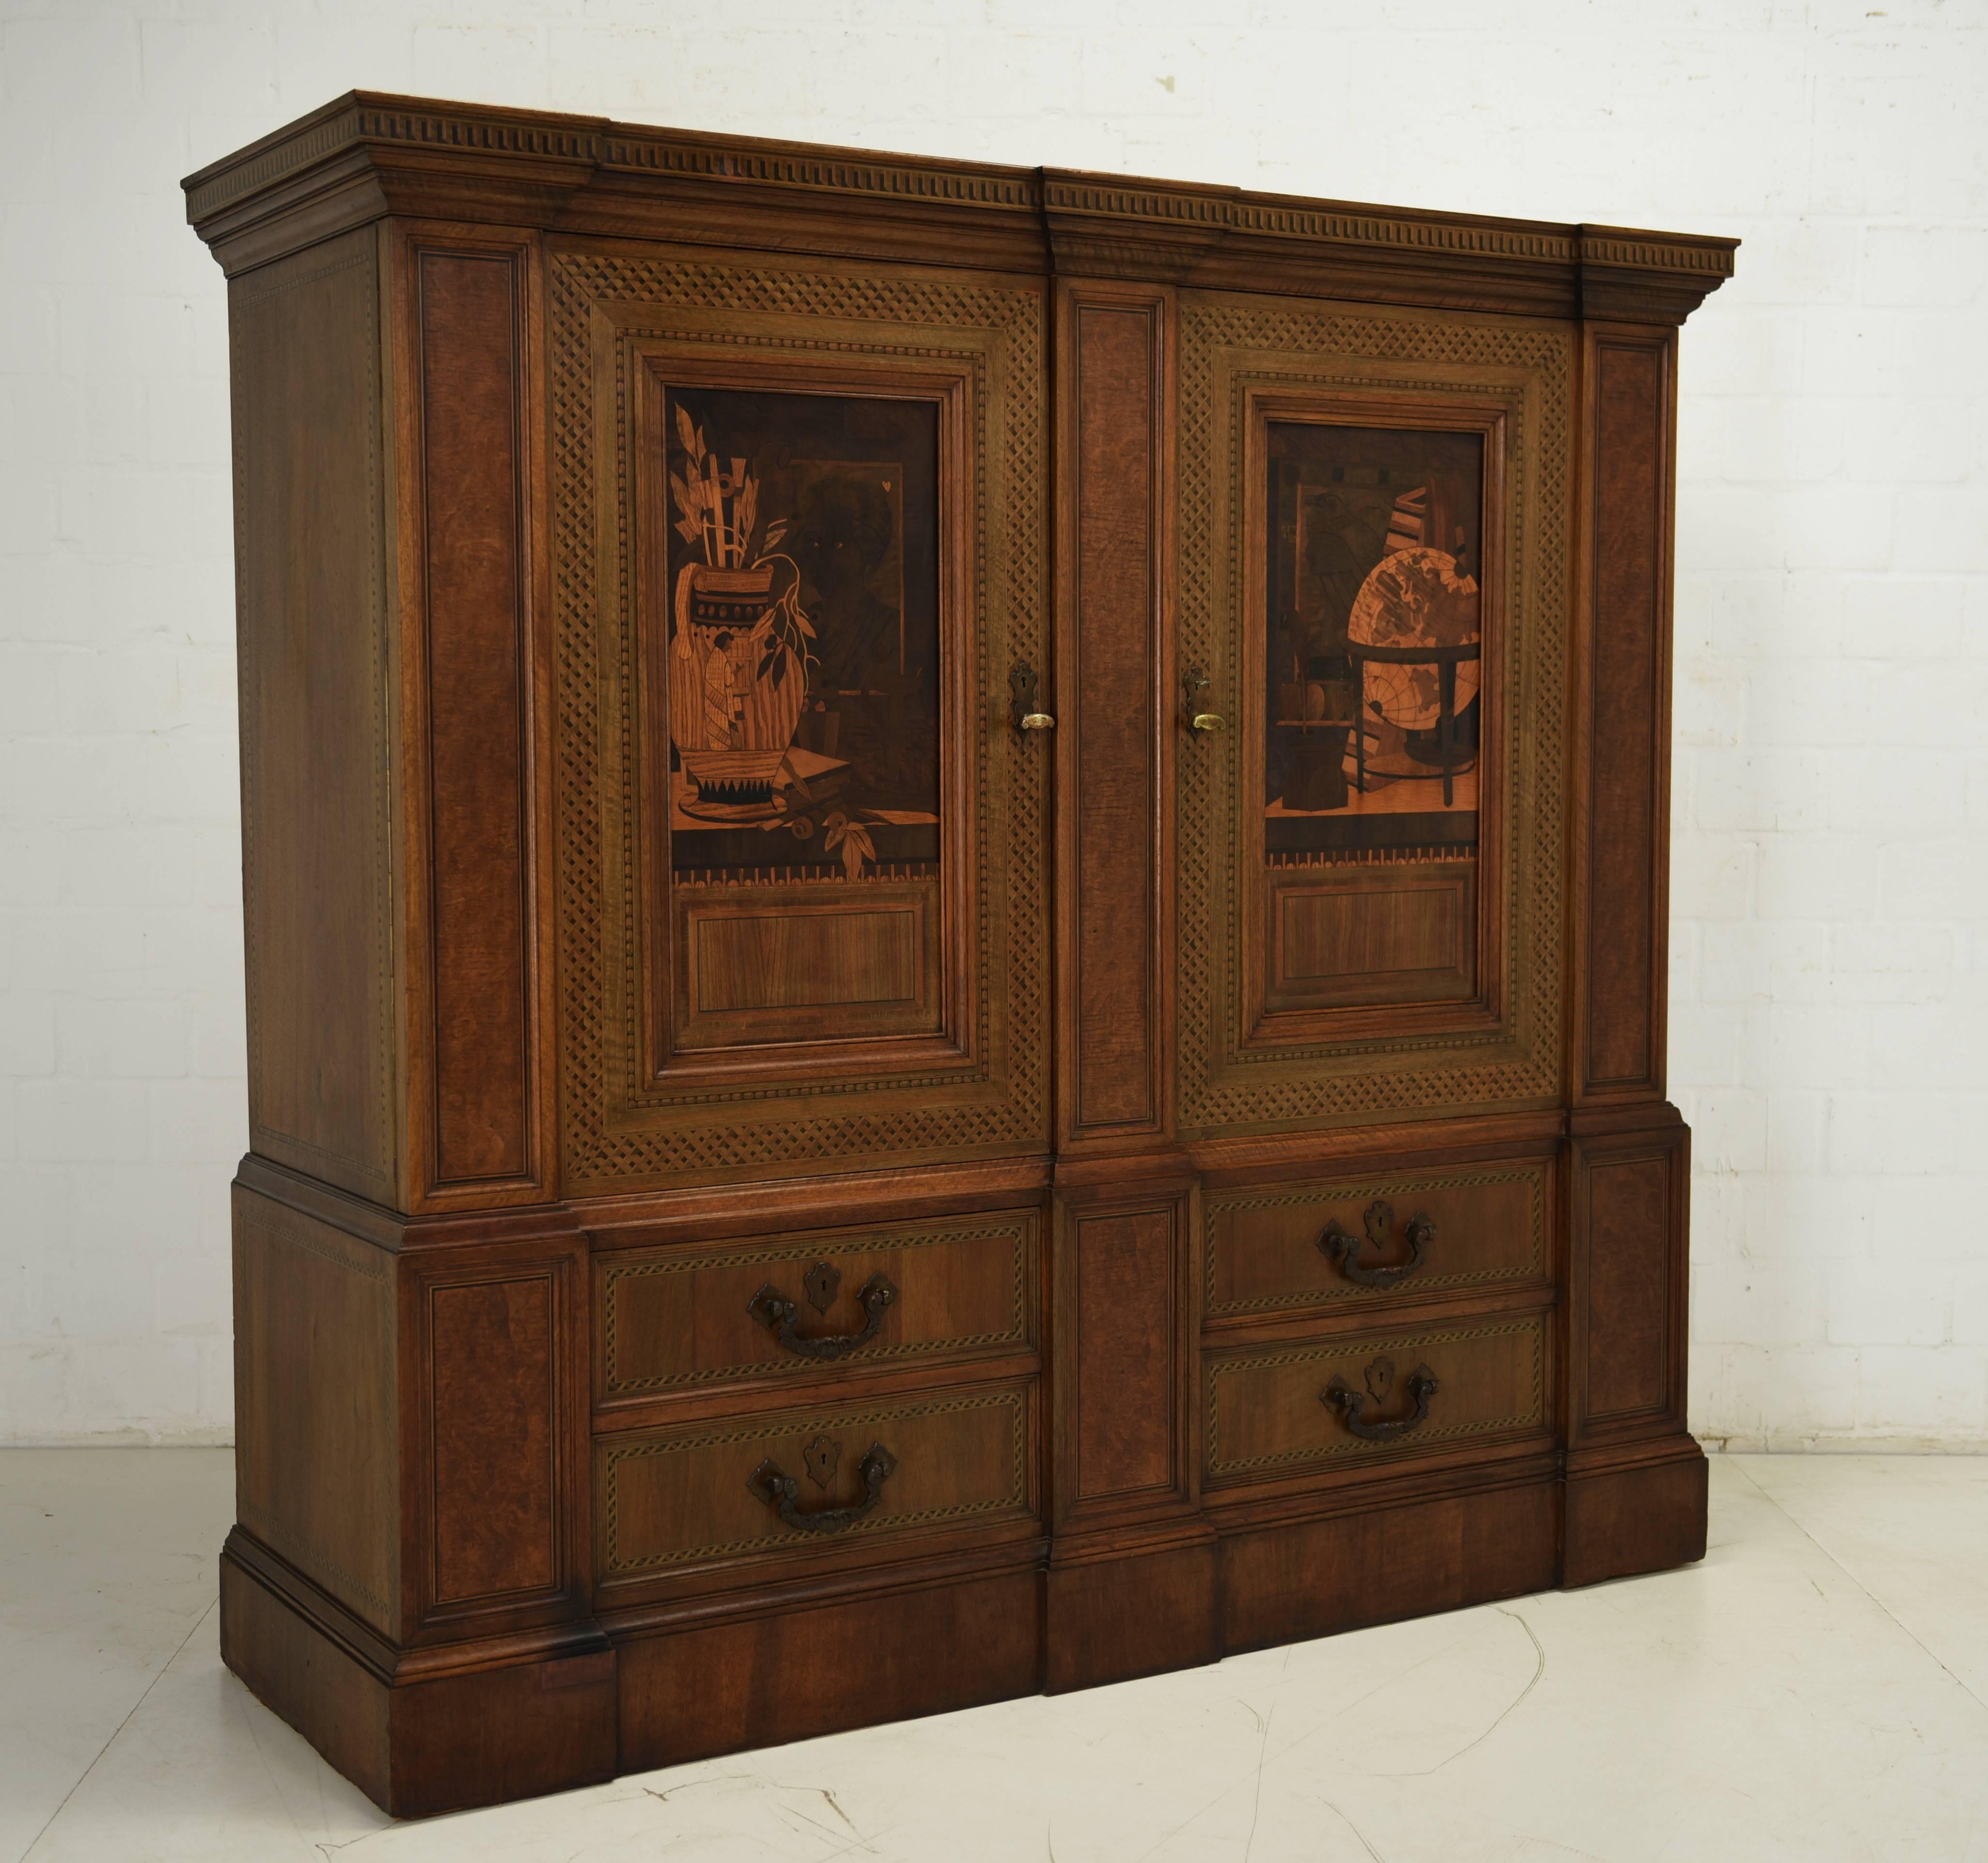 A brown cupboard from 1910 manufactured in Berlin by the cabinetmaker Kimbel and Friedrichsen. It is a custom build, in which the left part has been built for a safe. Because of the expediency and appearance the interior has now been expanded with